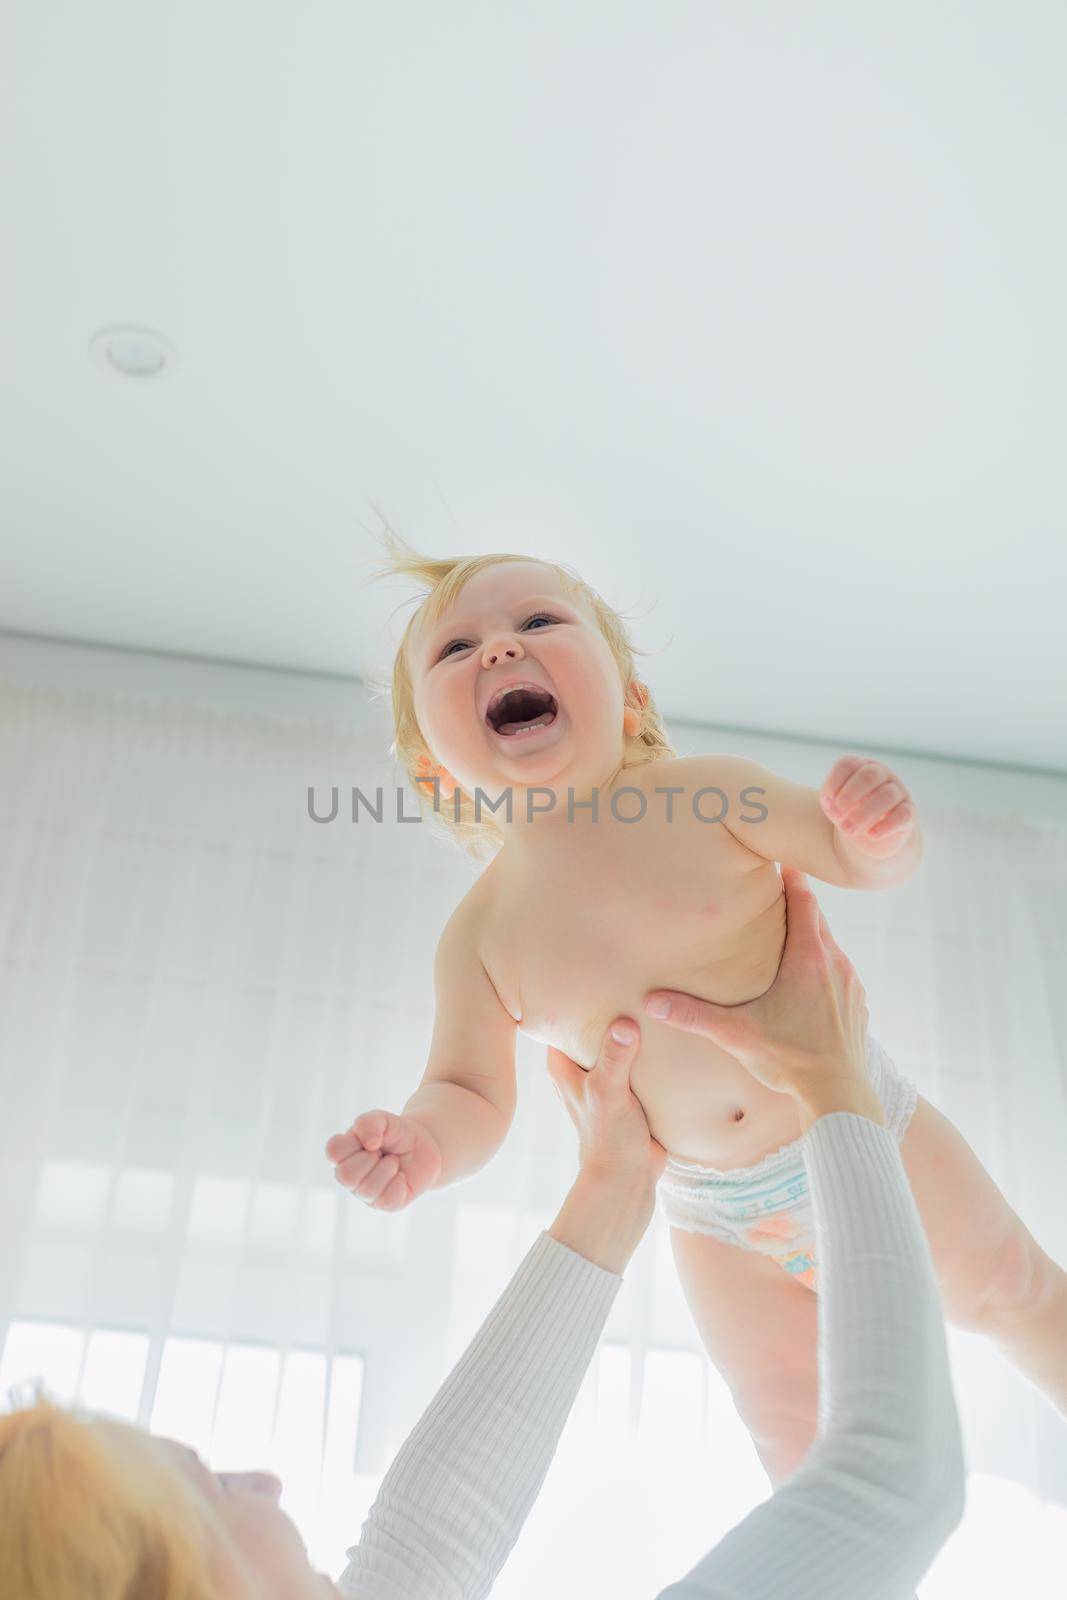 Mom, entertaining the baby, throws him up, rejoicing and having fun by Yurich32